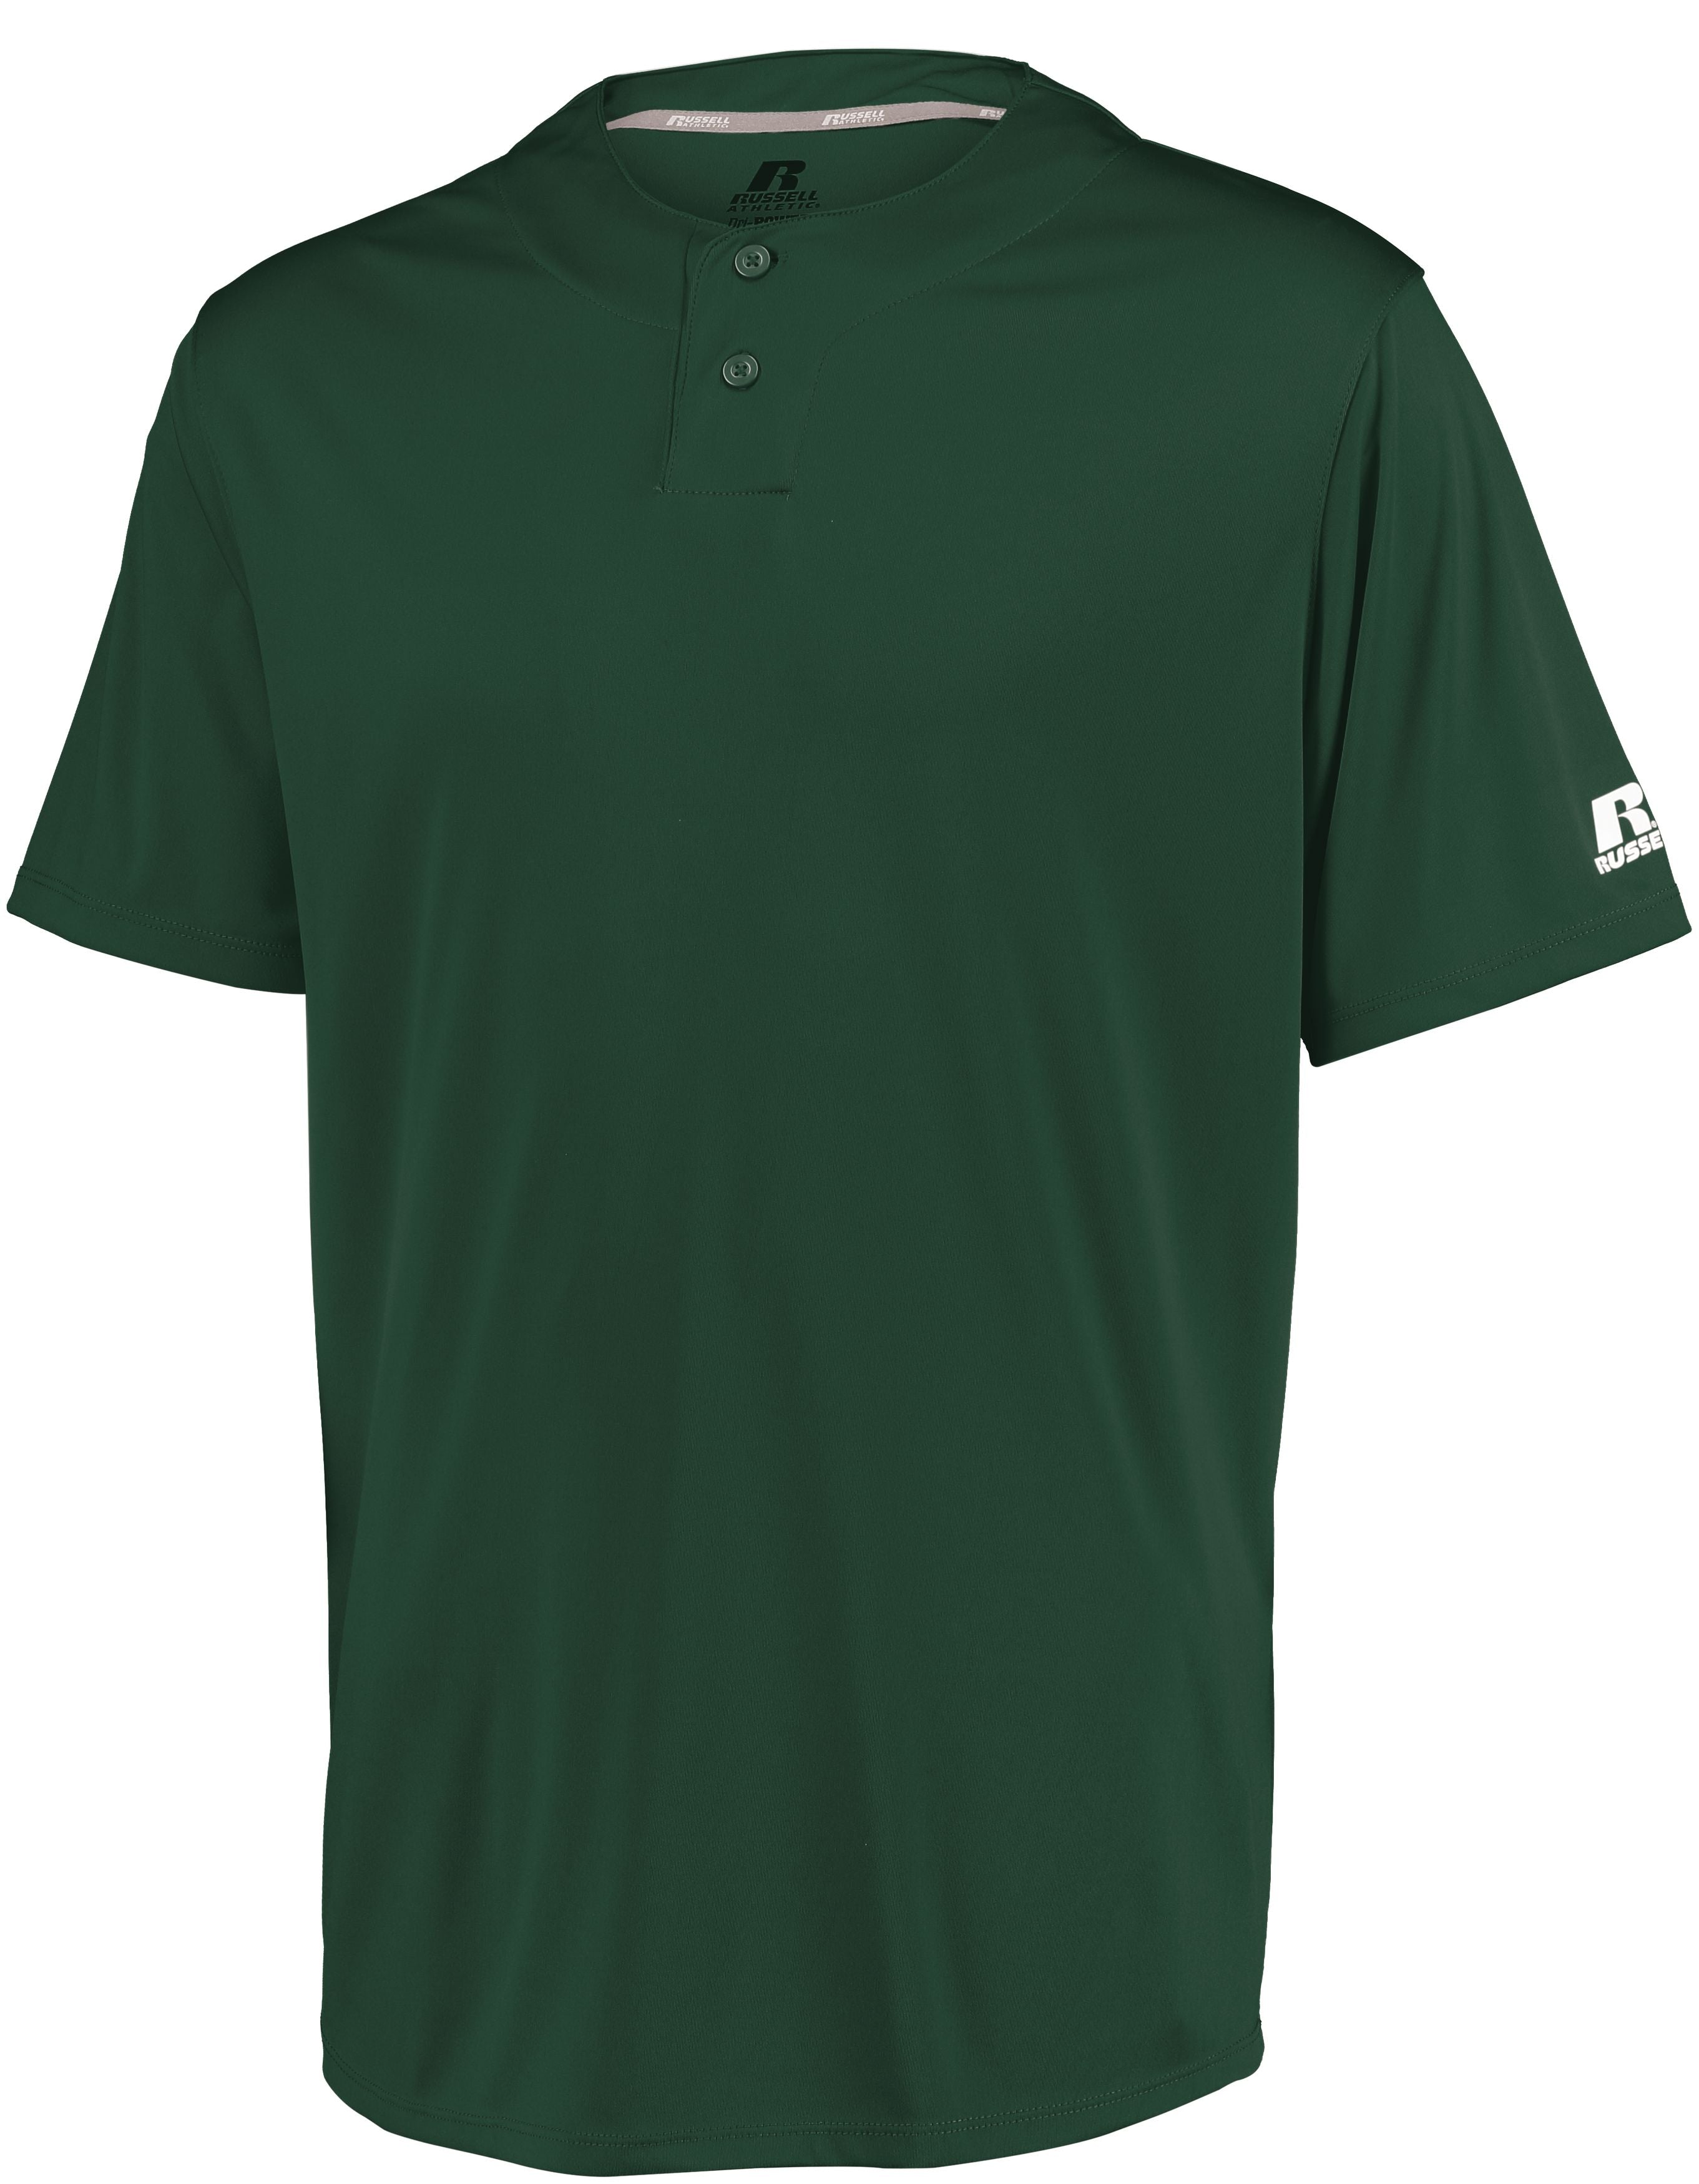 Russell Athletic Youth Performance Two-Button Solid Jersey in Dark Green  -Part of the Youth, Youth-Jersey, Baseball, Russell-Athletic-Products, Shirts, All-Sports, All-Sports-1 product lines at KanaleyCreations.com